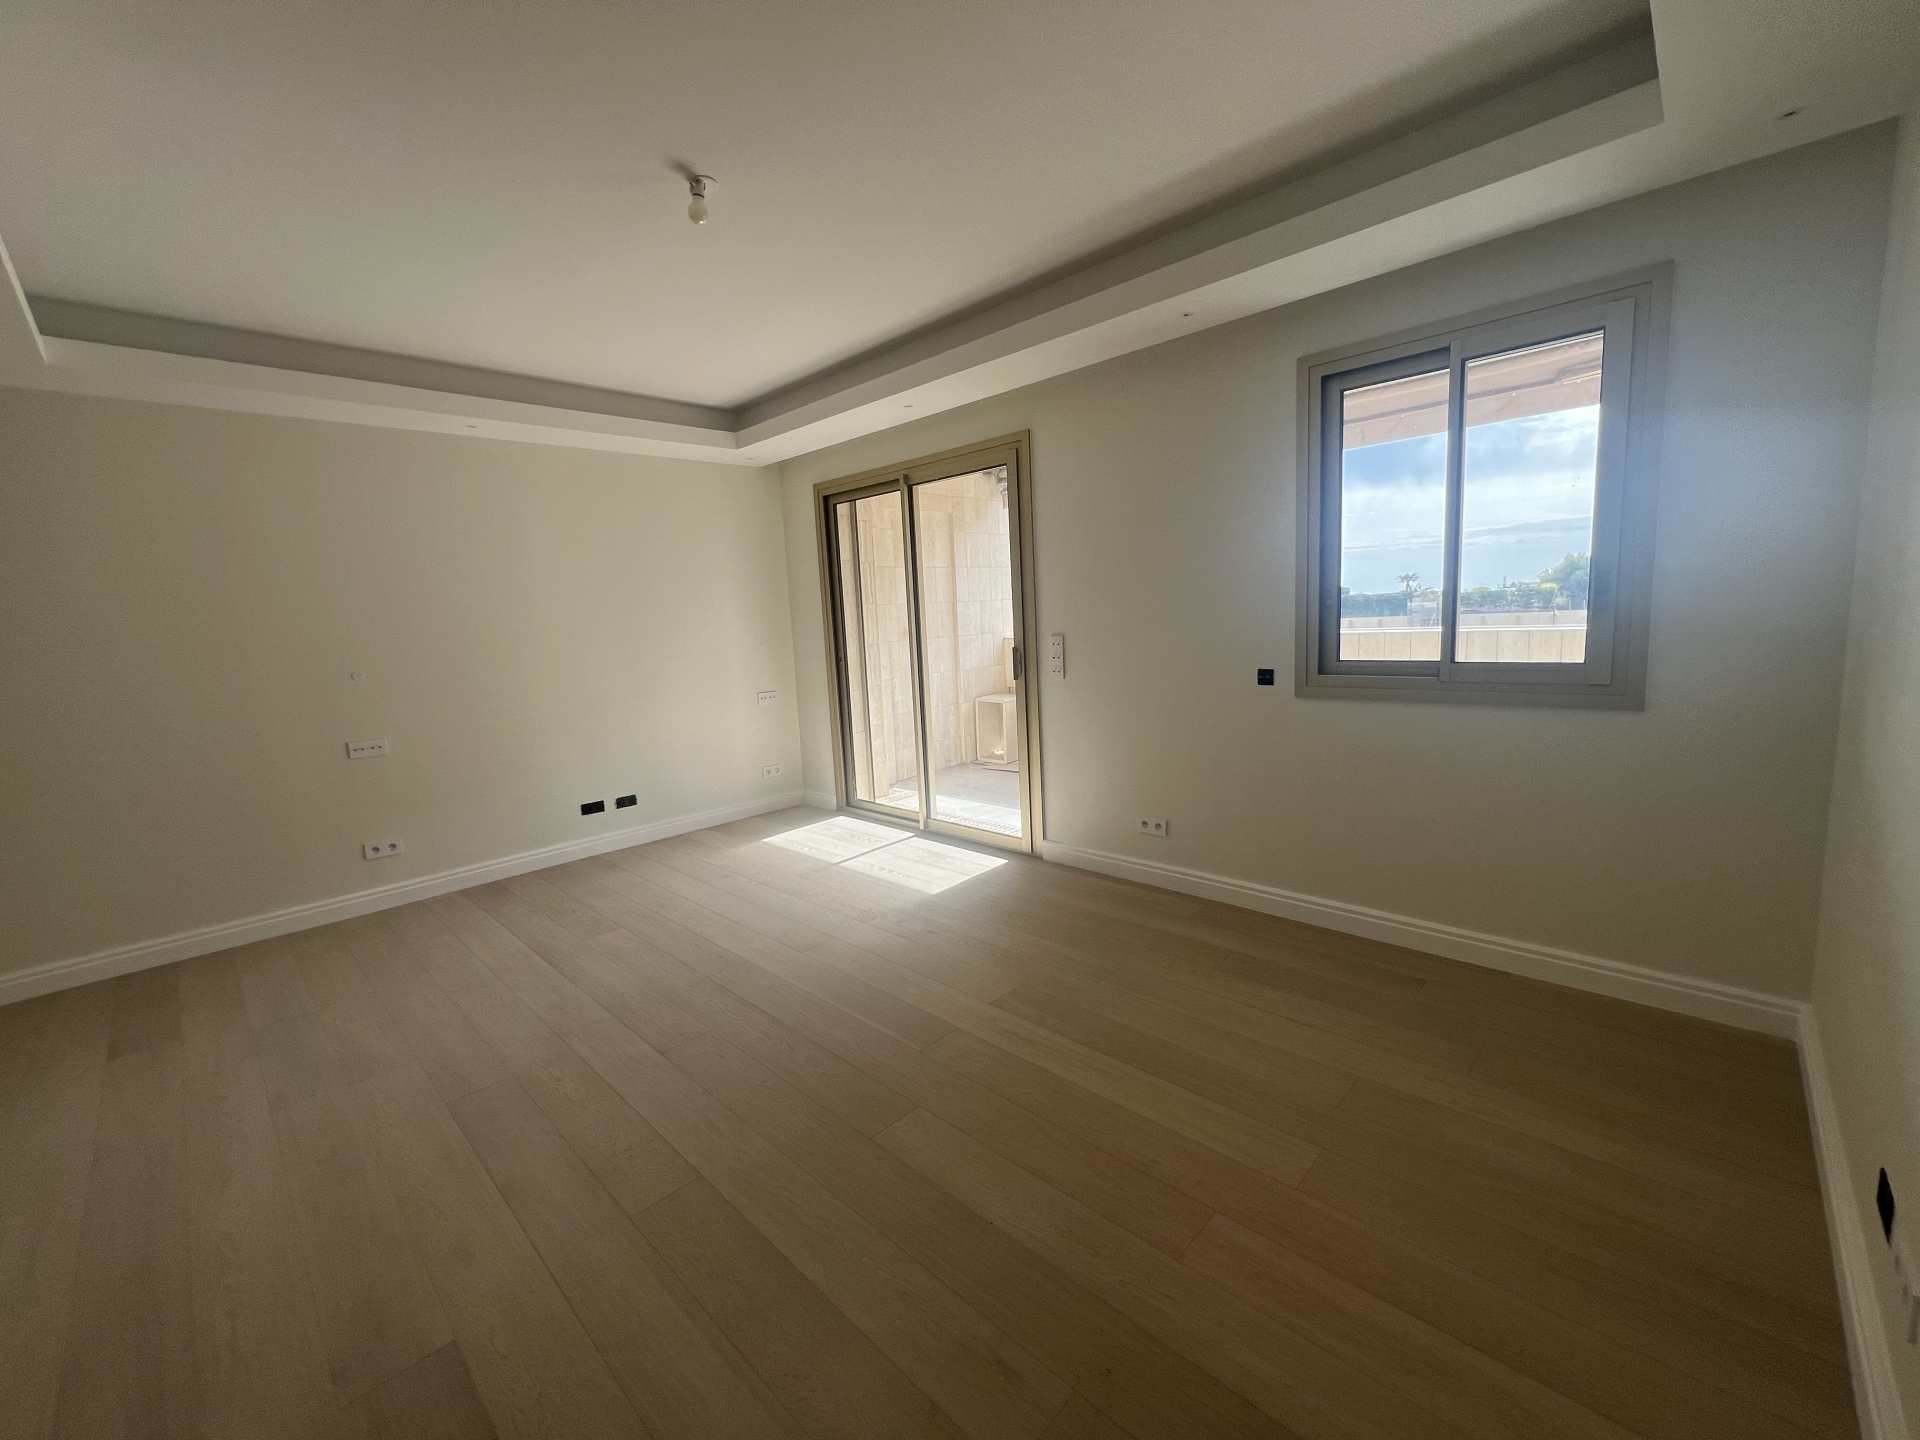 Dotta 5 rooms apartment for rent - GEORGE V - Monte-Carlo - Monaco - imgimage00009